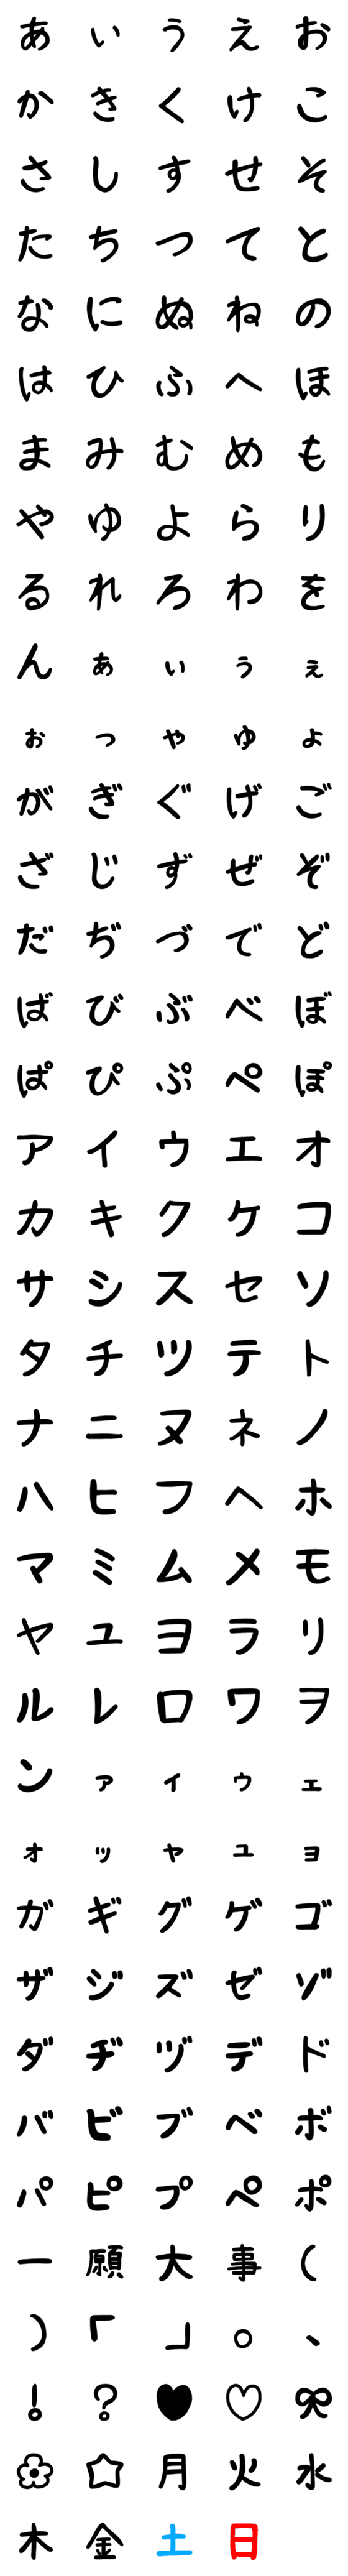 [LINE絵文字]手書き風黒文字『文字を強調』の画像一覧